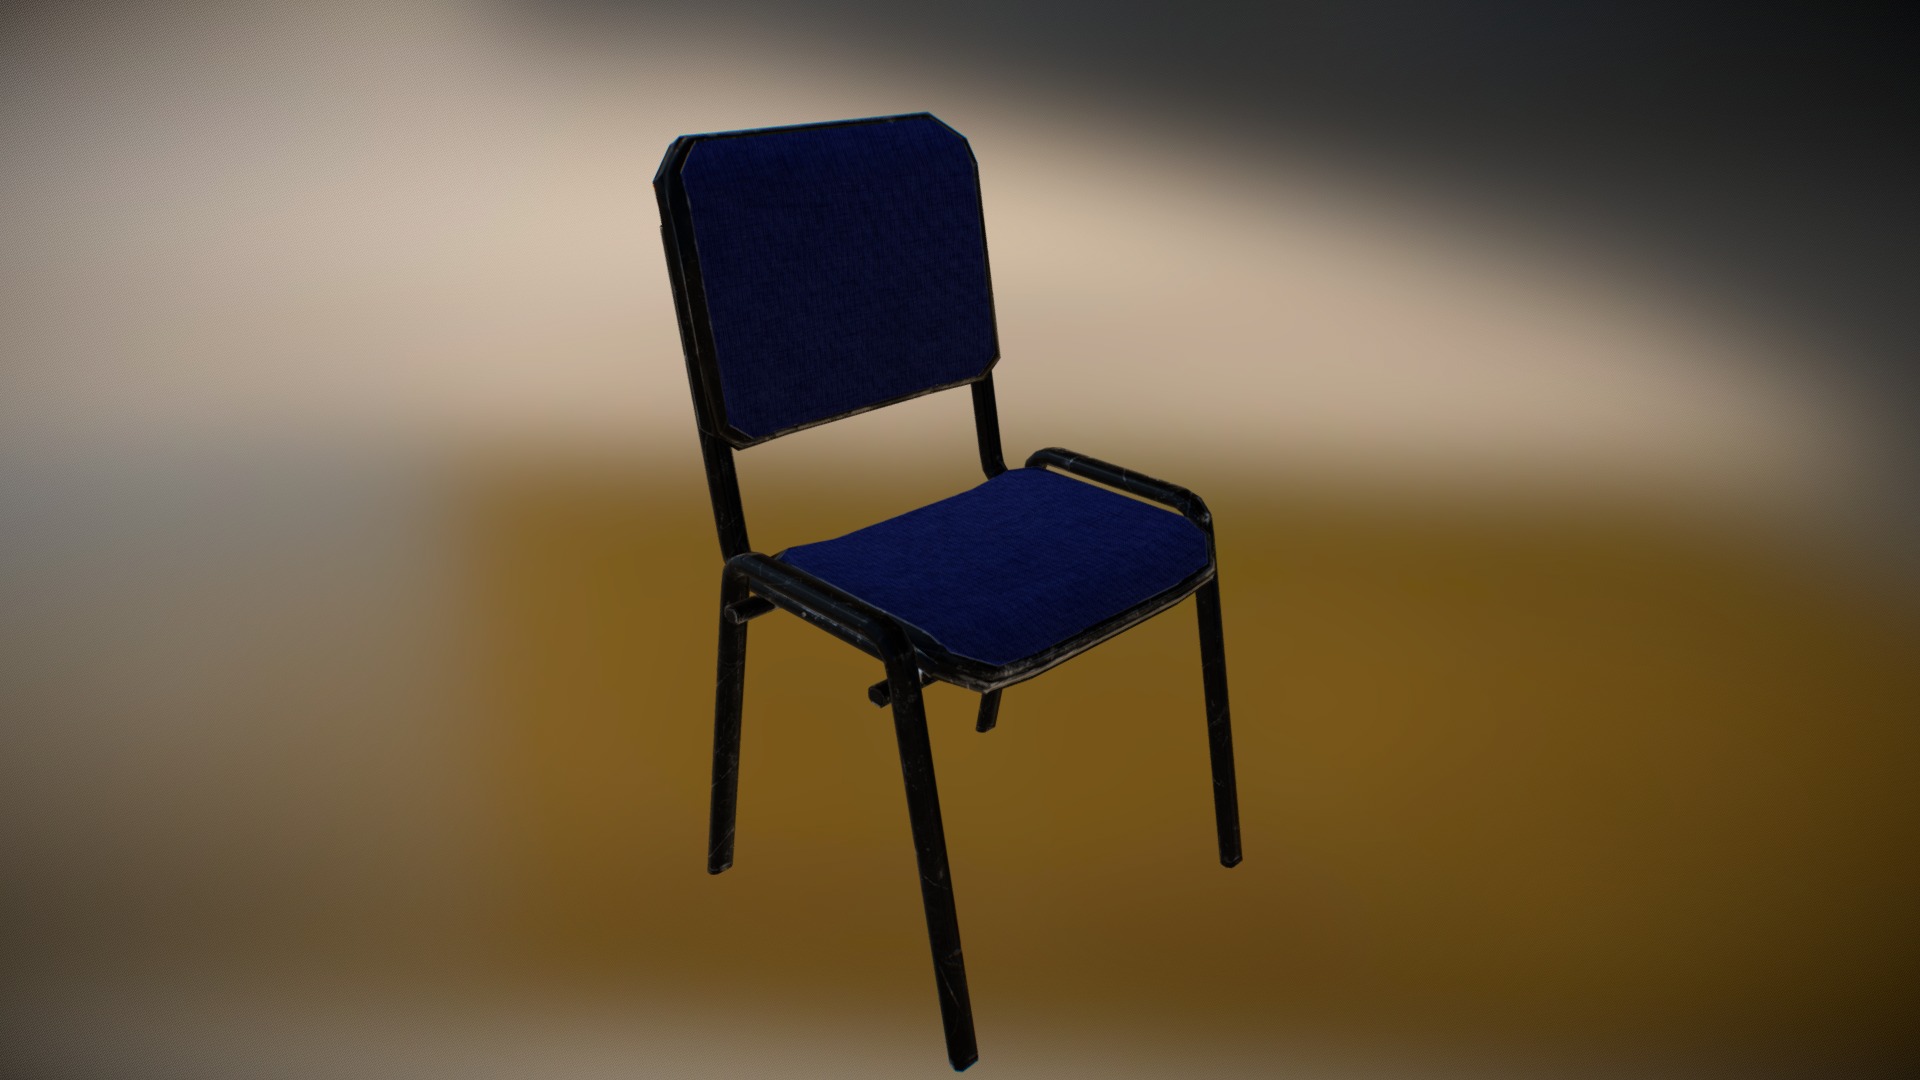 3D model Chair - This is a 3D model of the Chair. The 3D model is about a blue chair with a yellow background.